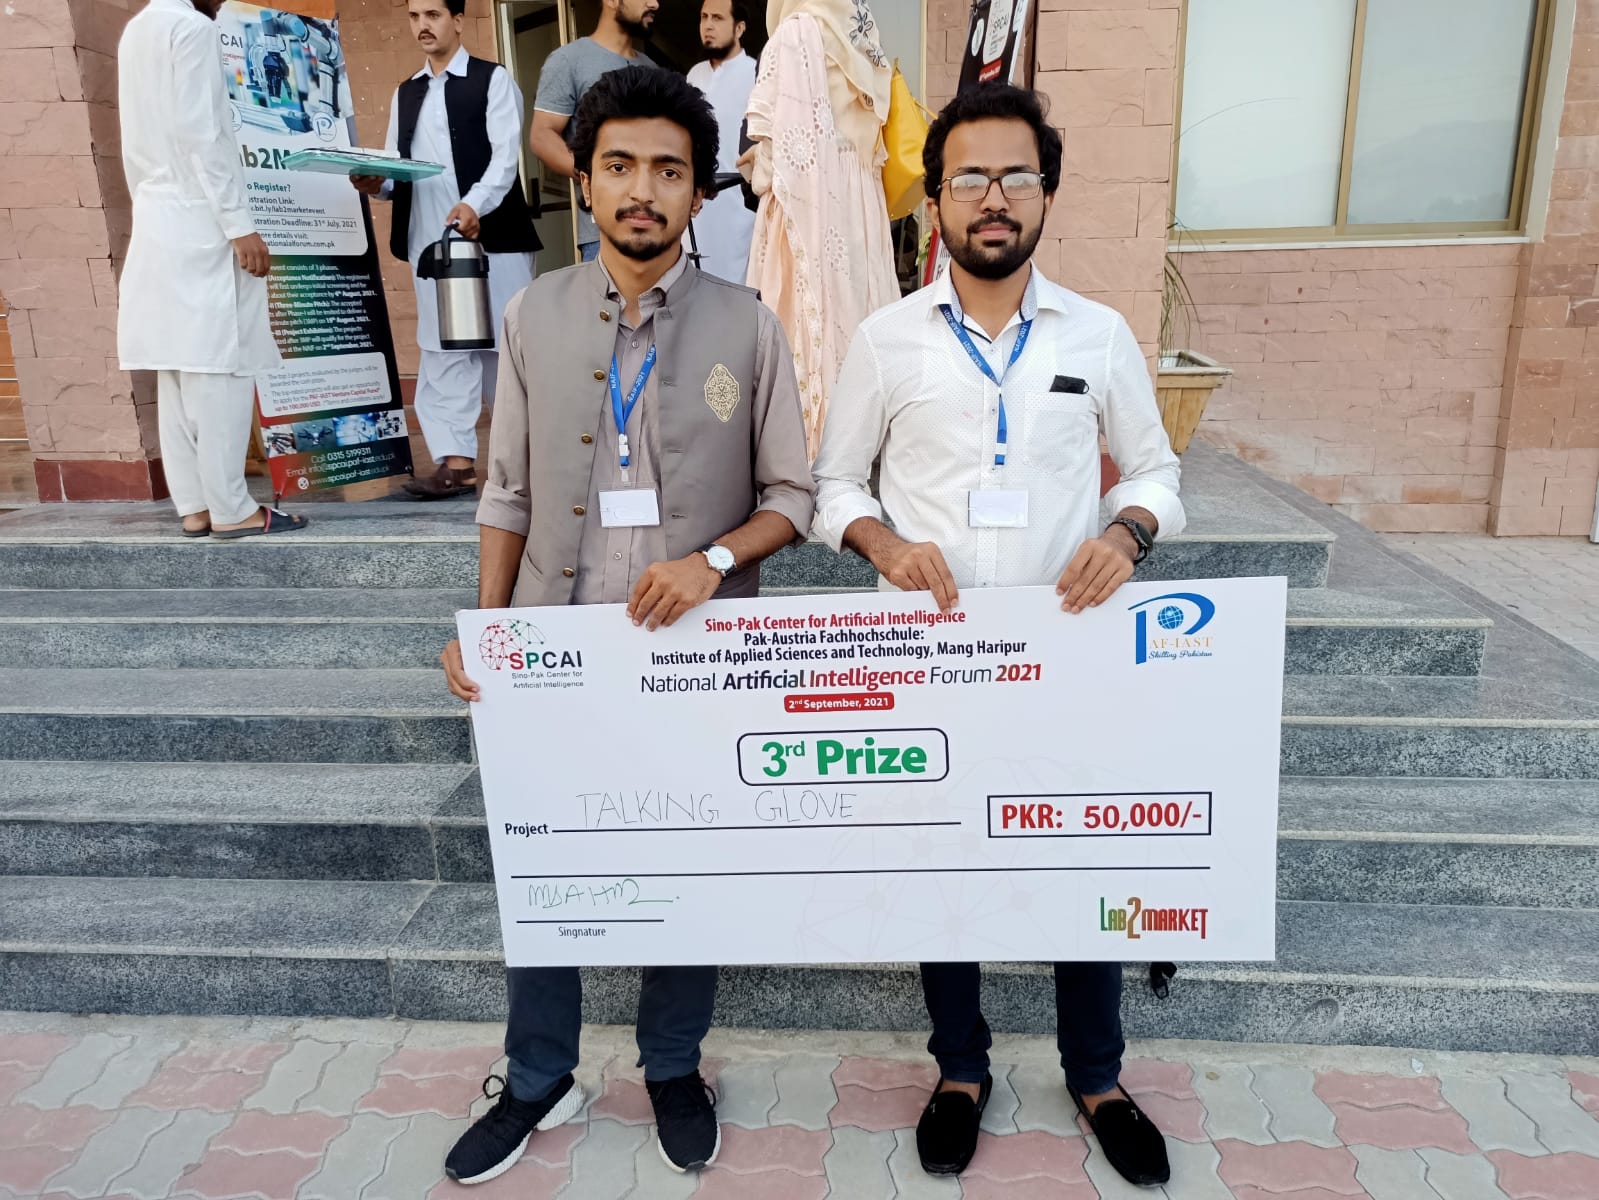 Numl Electrical Engineering students secured 3rd position in all pakistan sino-pak center of artificial intelligence "Lab 2 Market" event